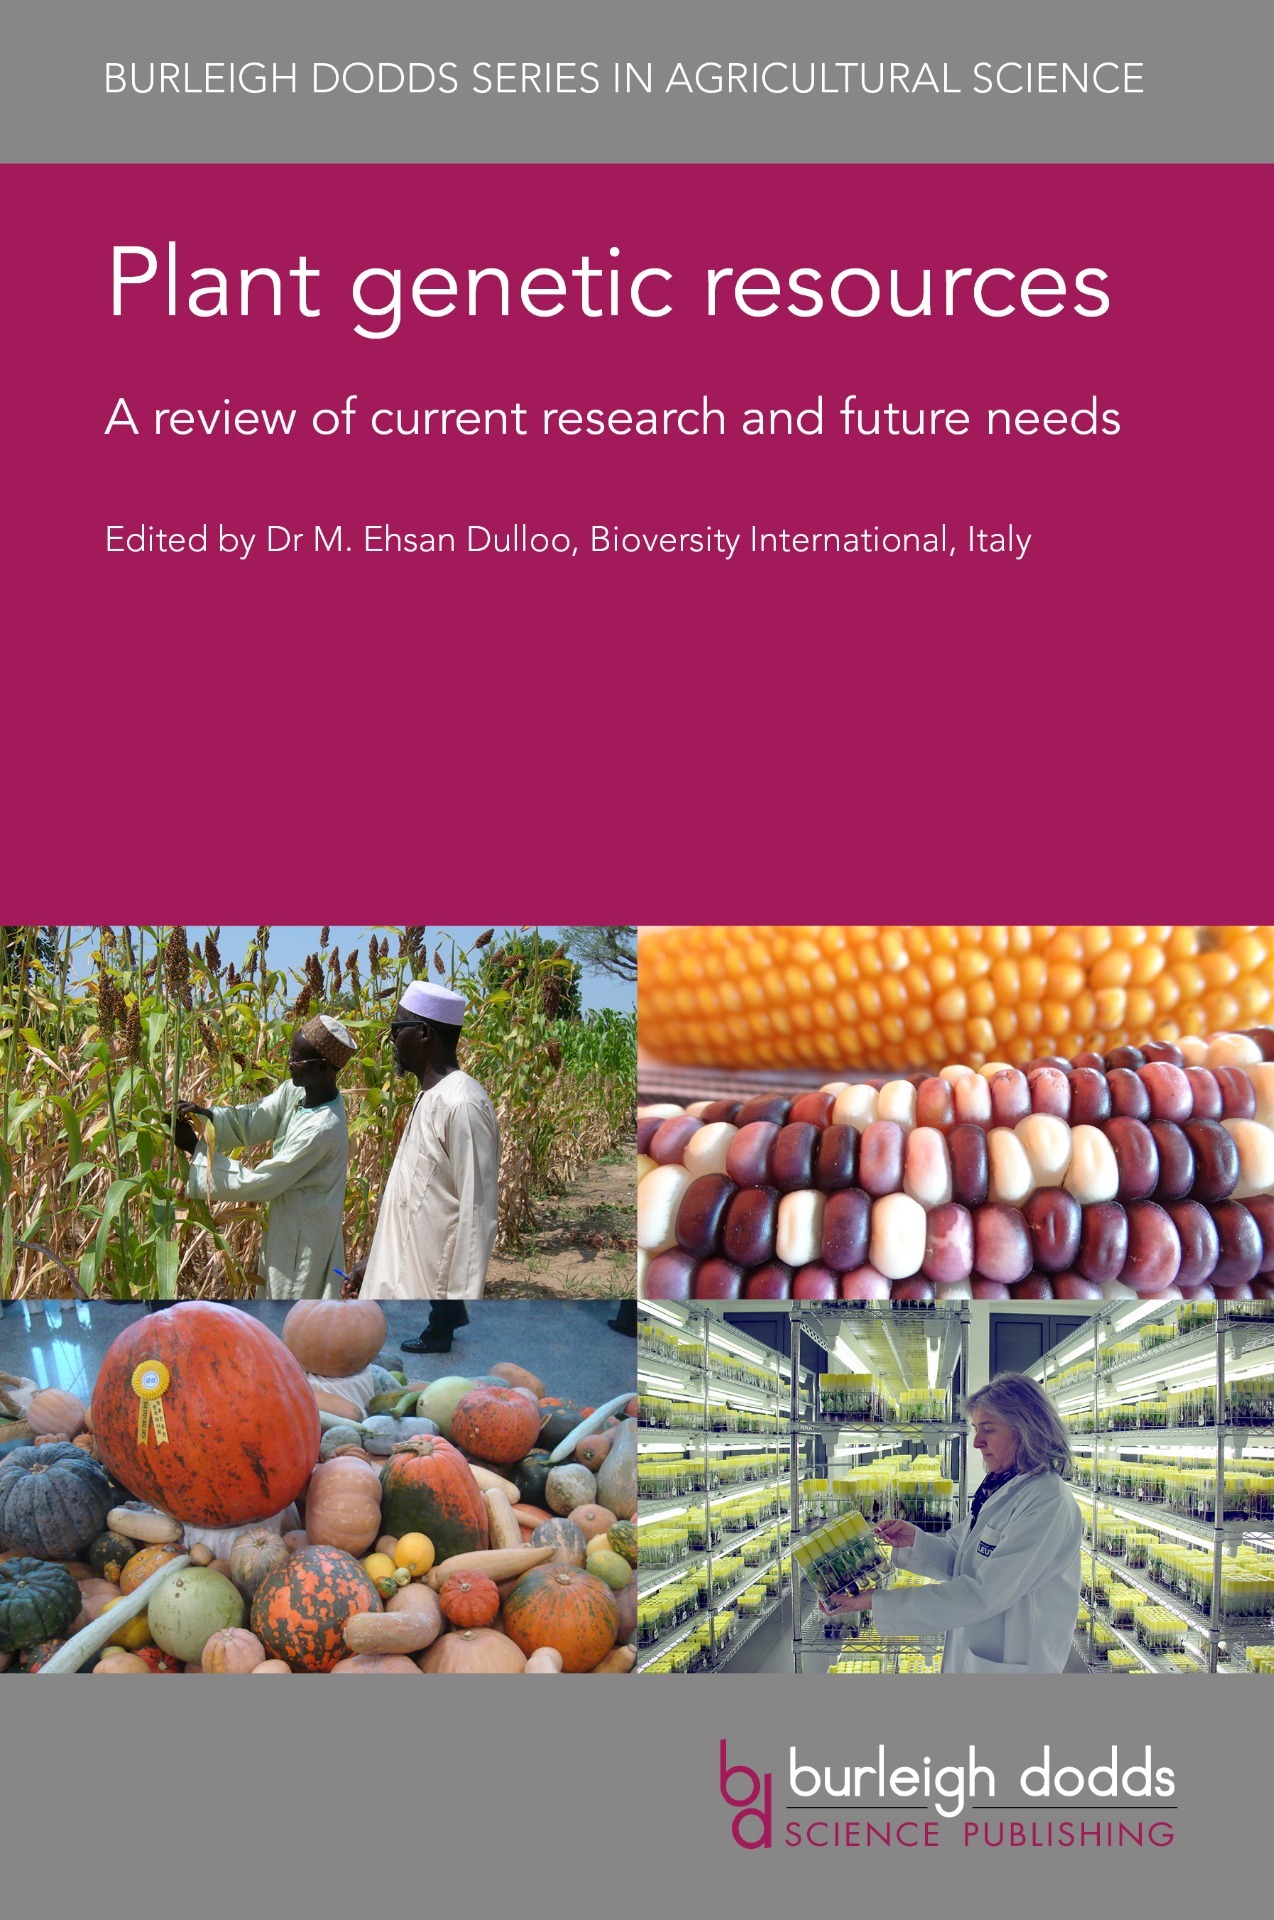 Plant genetic resources: A review of current research and future needs